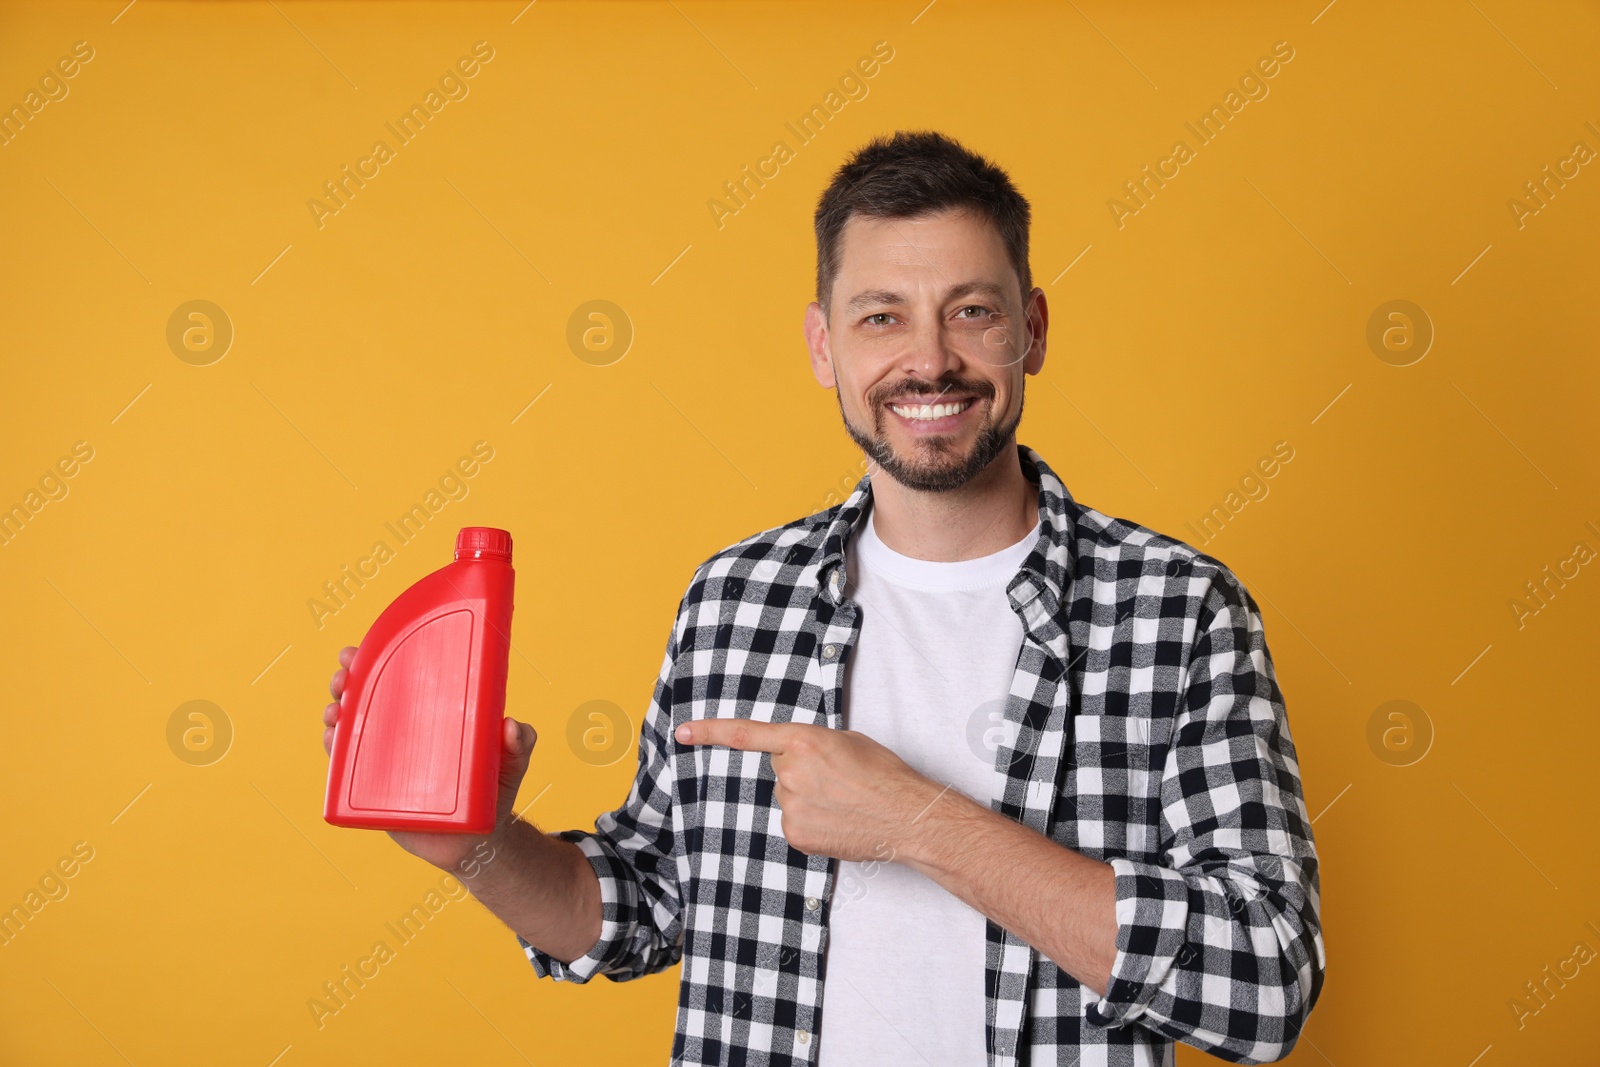 Photo of Man pointing at red container of motor oil on orange background